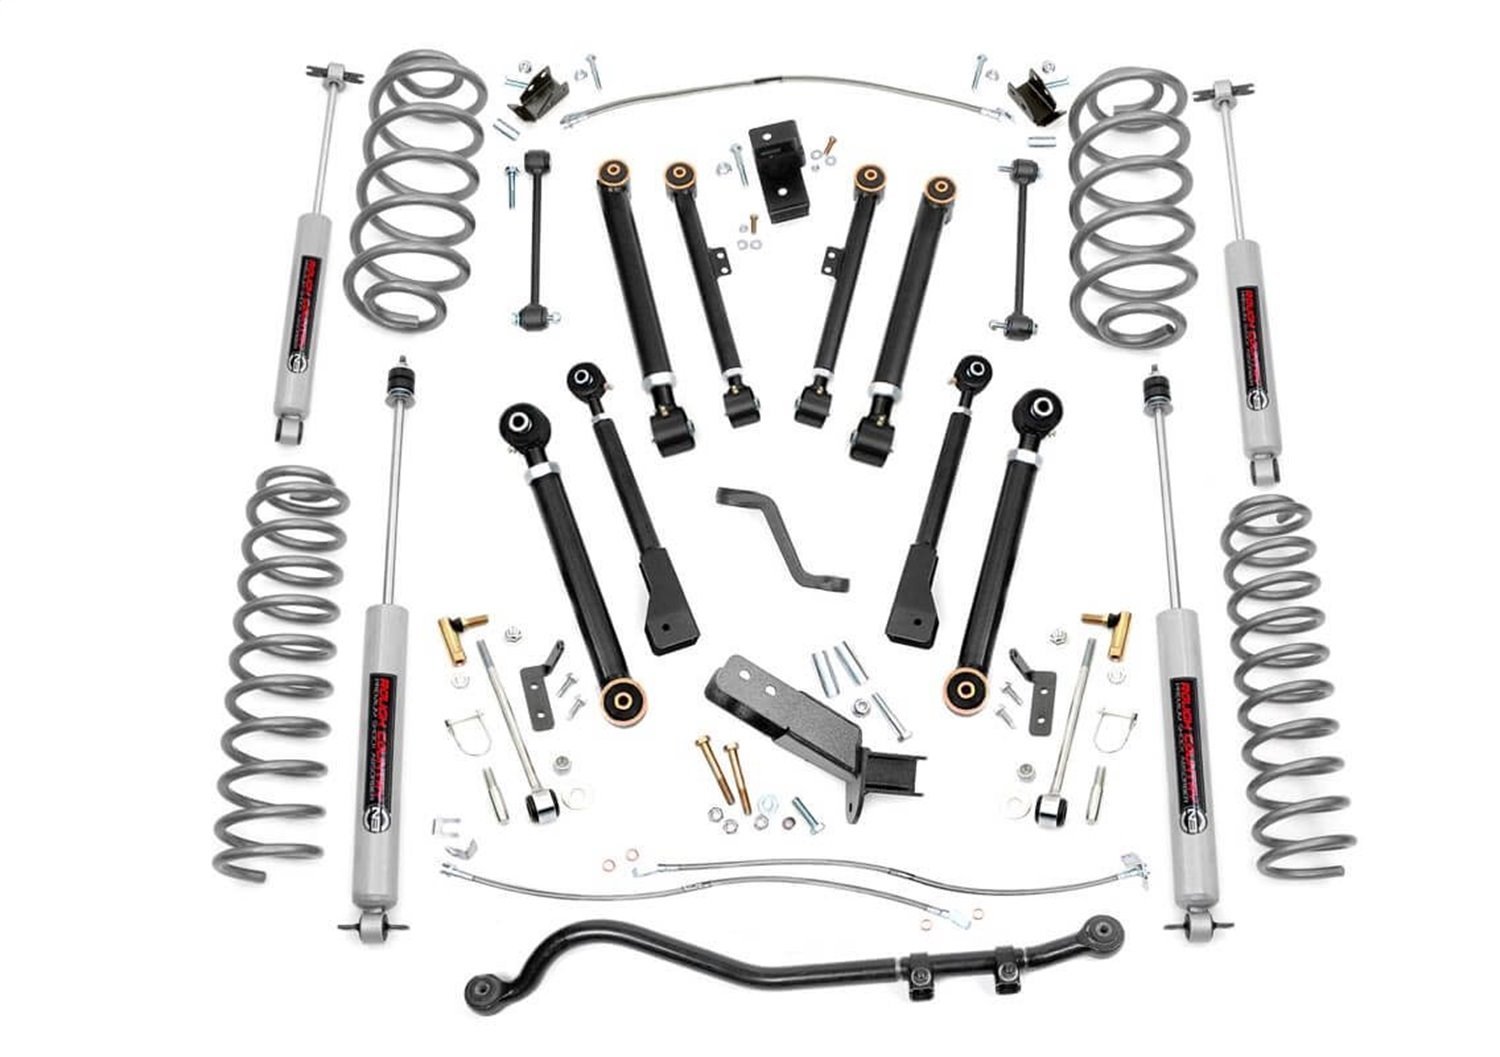 66220 6-inch X-Series Suspension Lift System